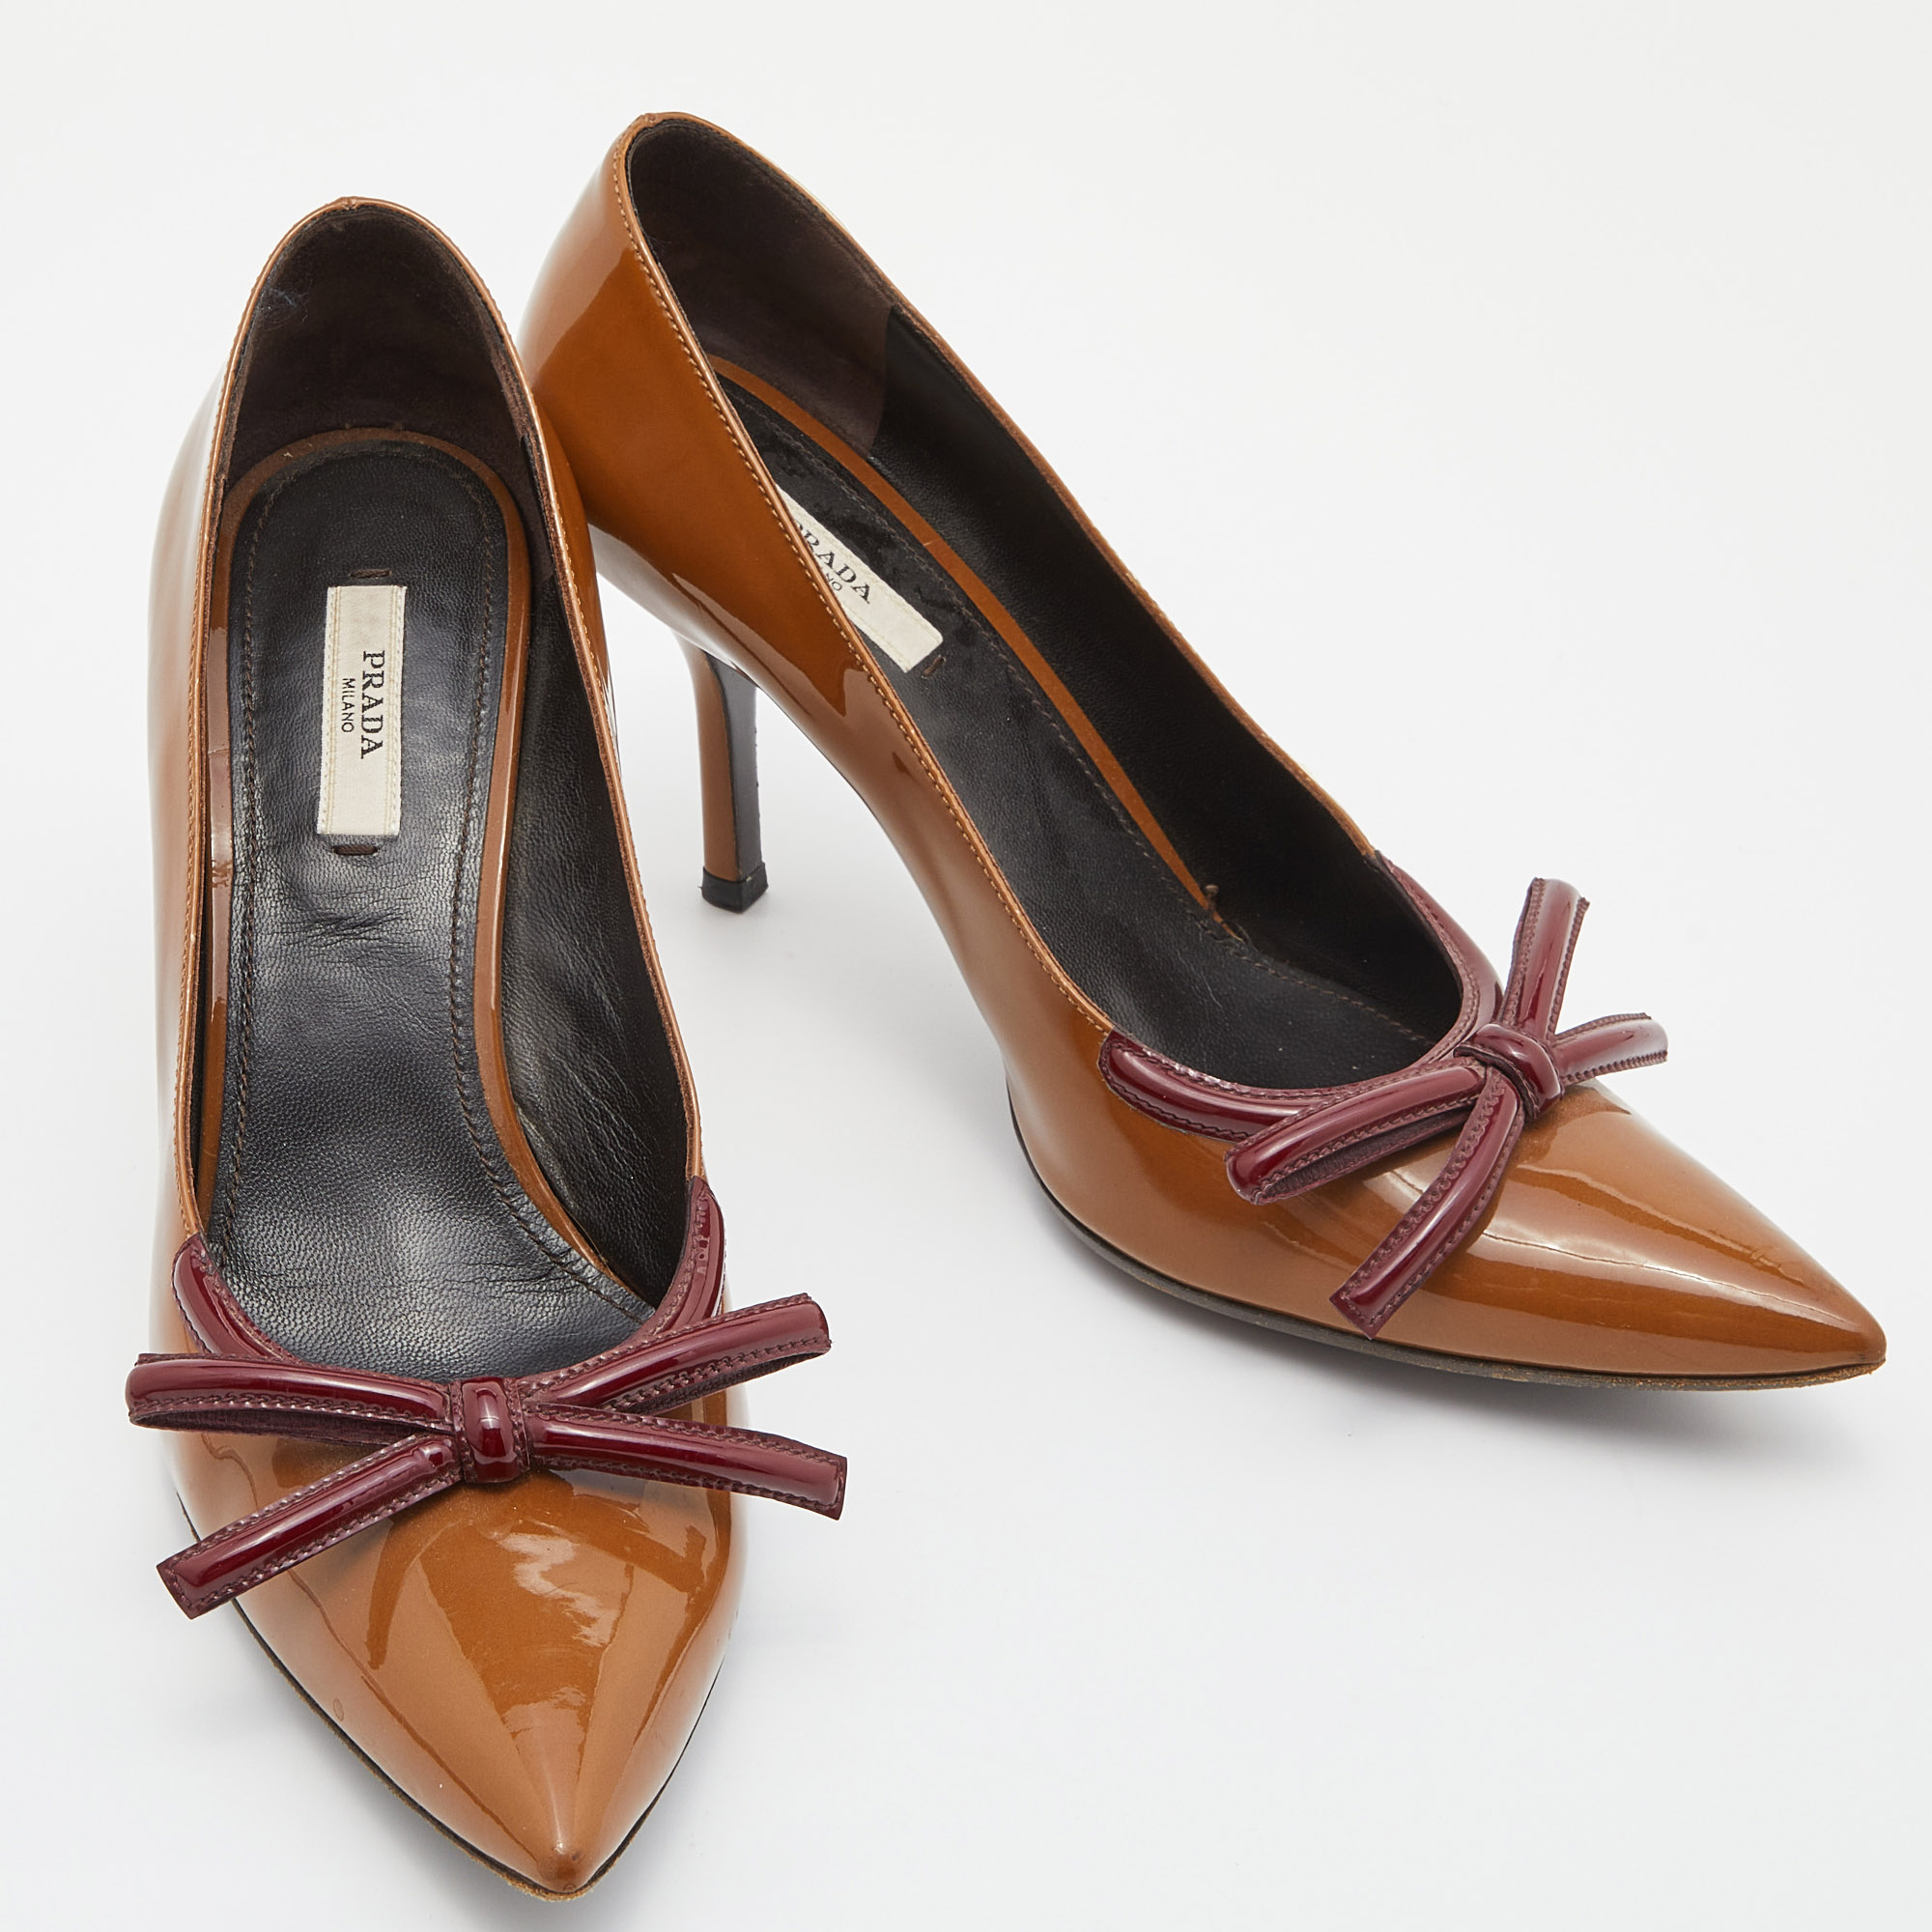 Prada Brown/Red Patent Leather Bow Pointed Pumps Size 39.5